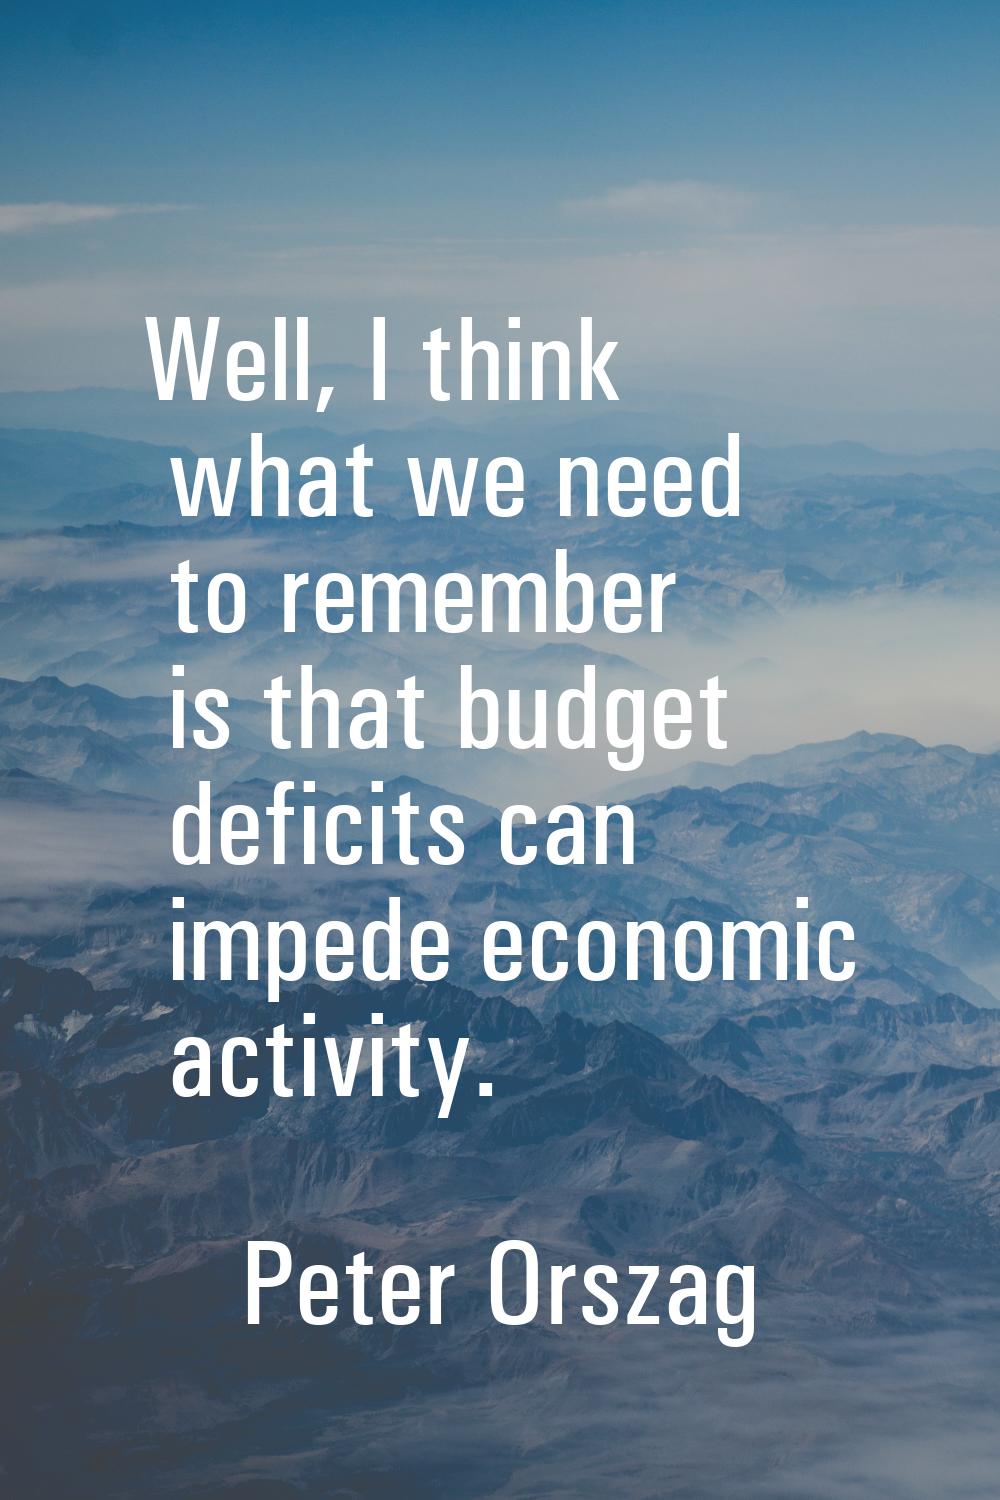 Well, I think what we need to remember is that budget deficits can impede economic activity.